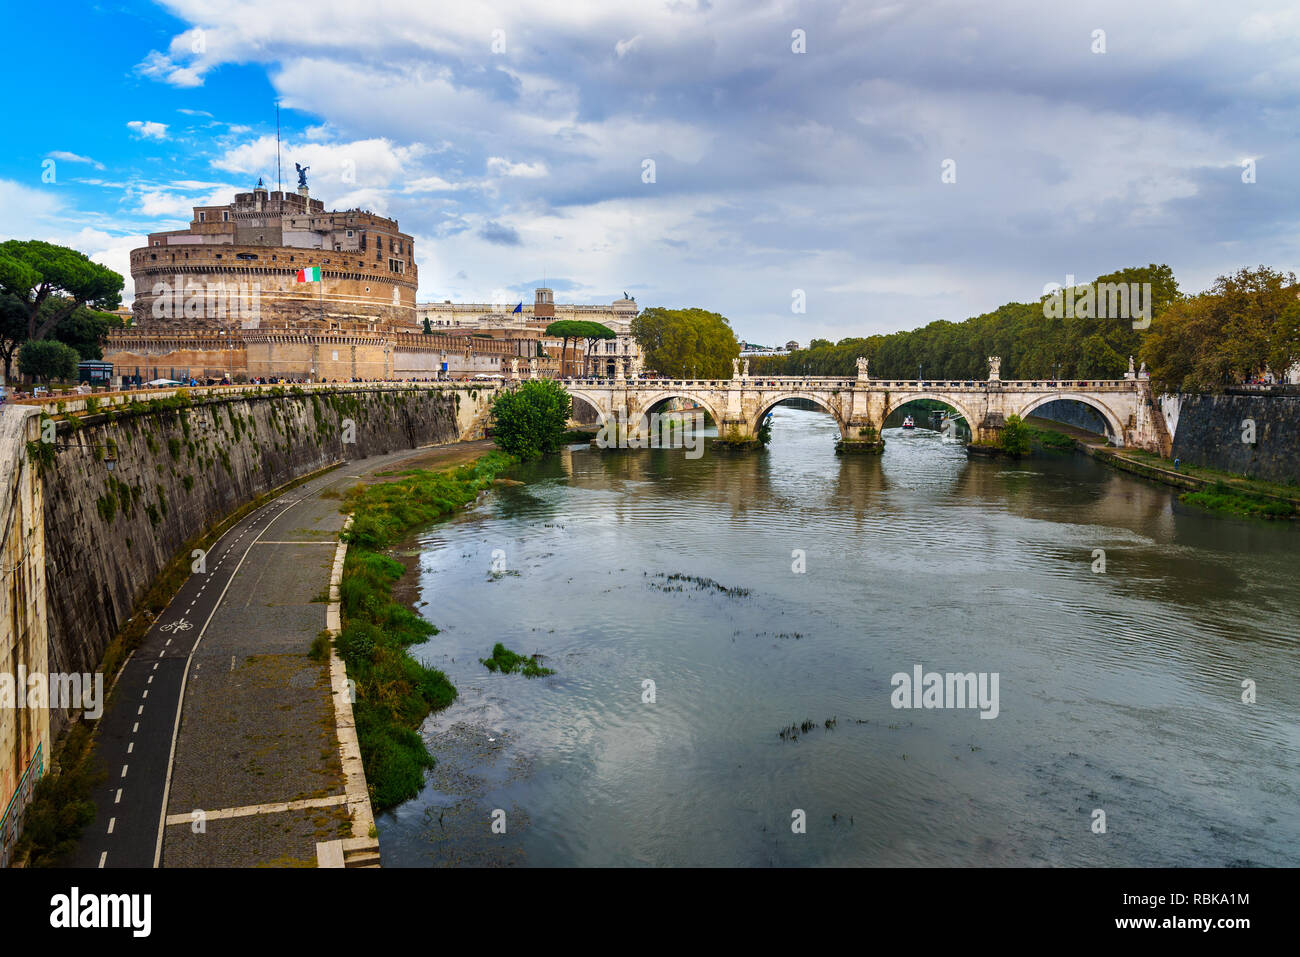 Castel Sant'Angelo or castle of Holy Angel and Ponte Sant'Angelo or Aelian Bridge over the Tiber river in Rome. Italy Stock Photo